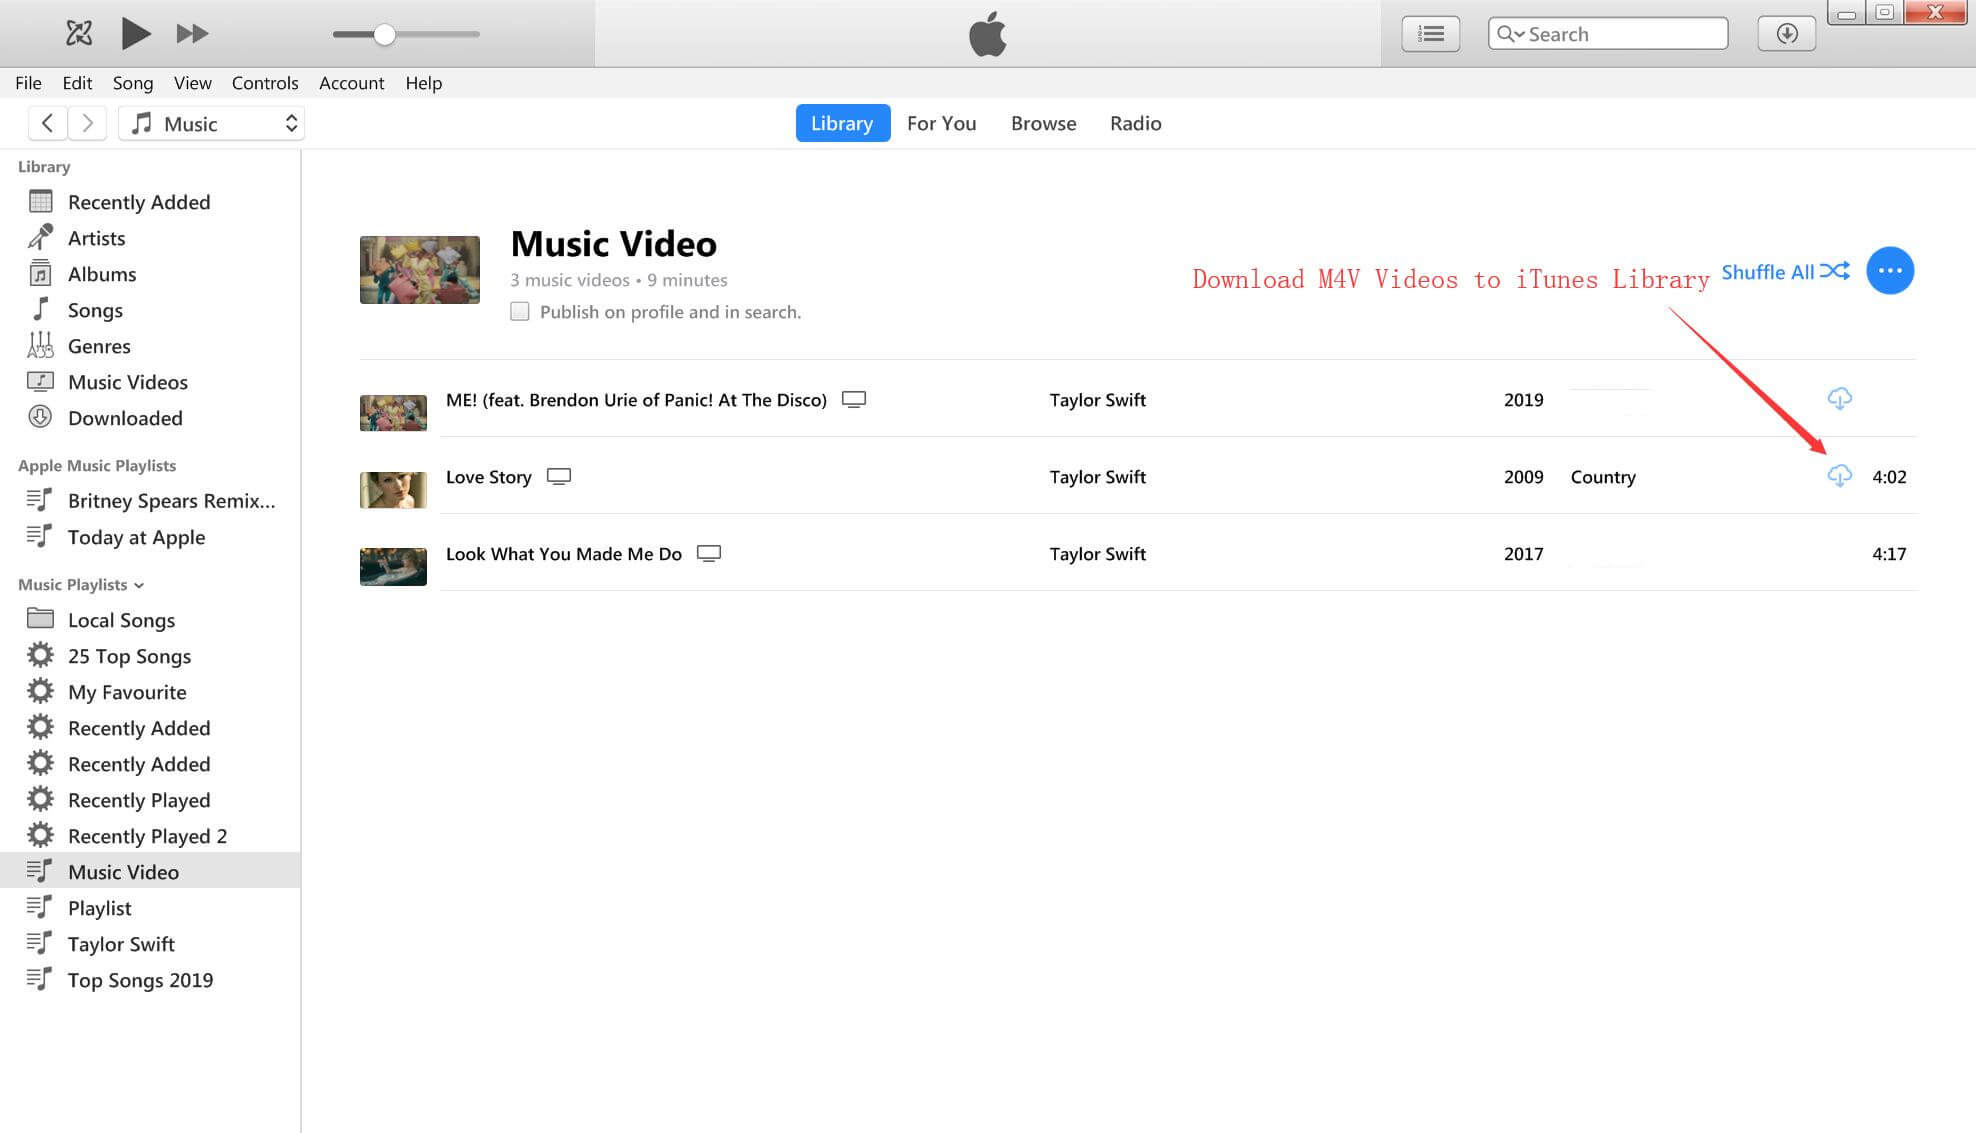 Download iTunes M4V Music Videos into the Library